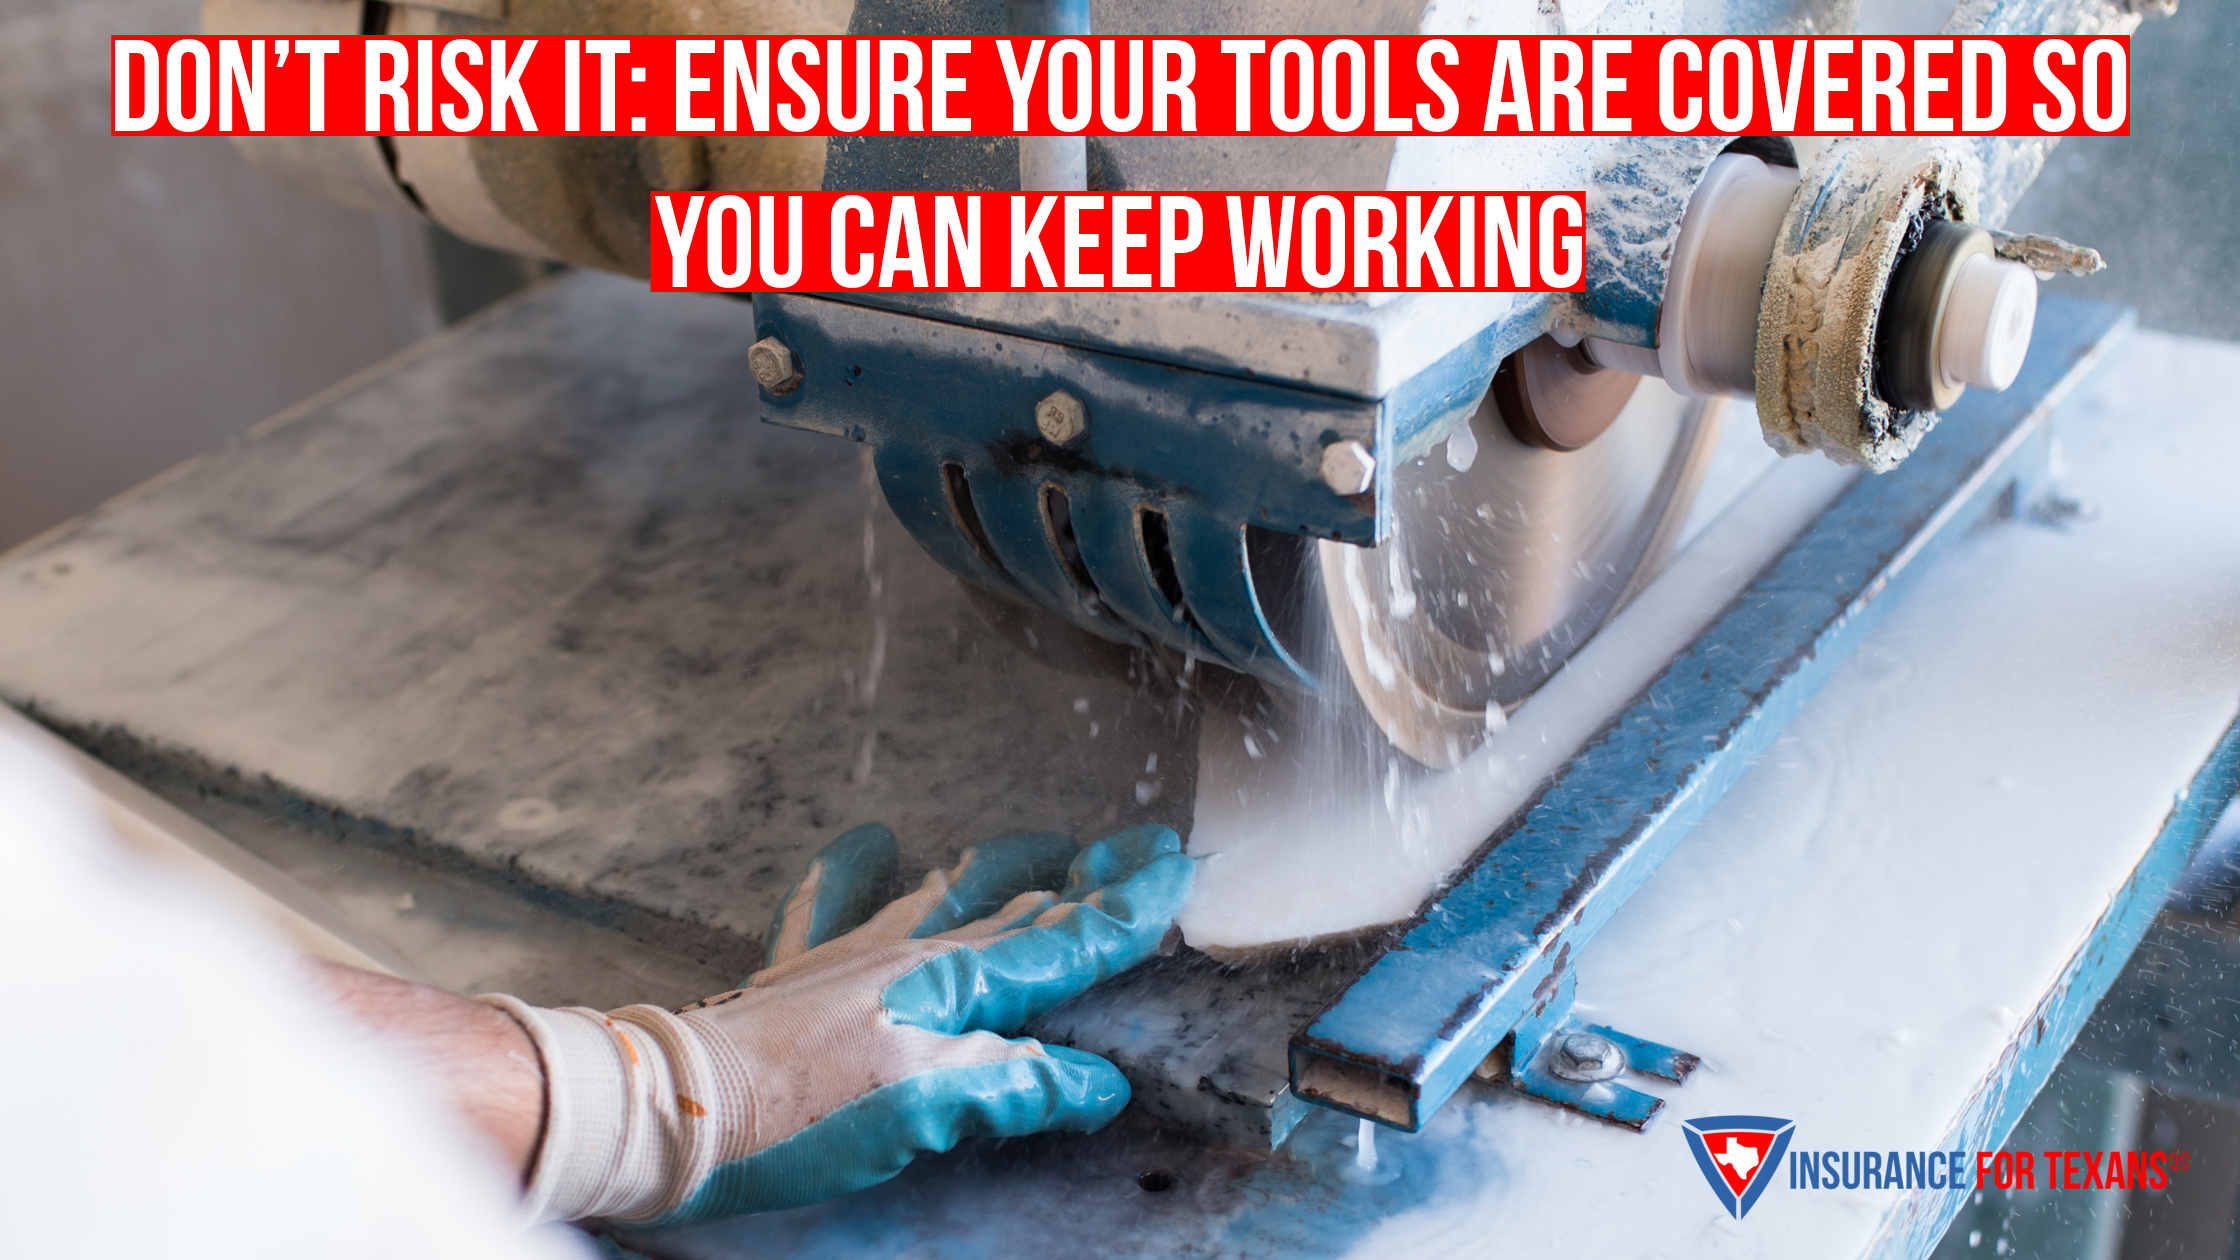 Don’t Risk It: Ensure Your Tools are Covered So You Can Keep Working